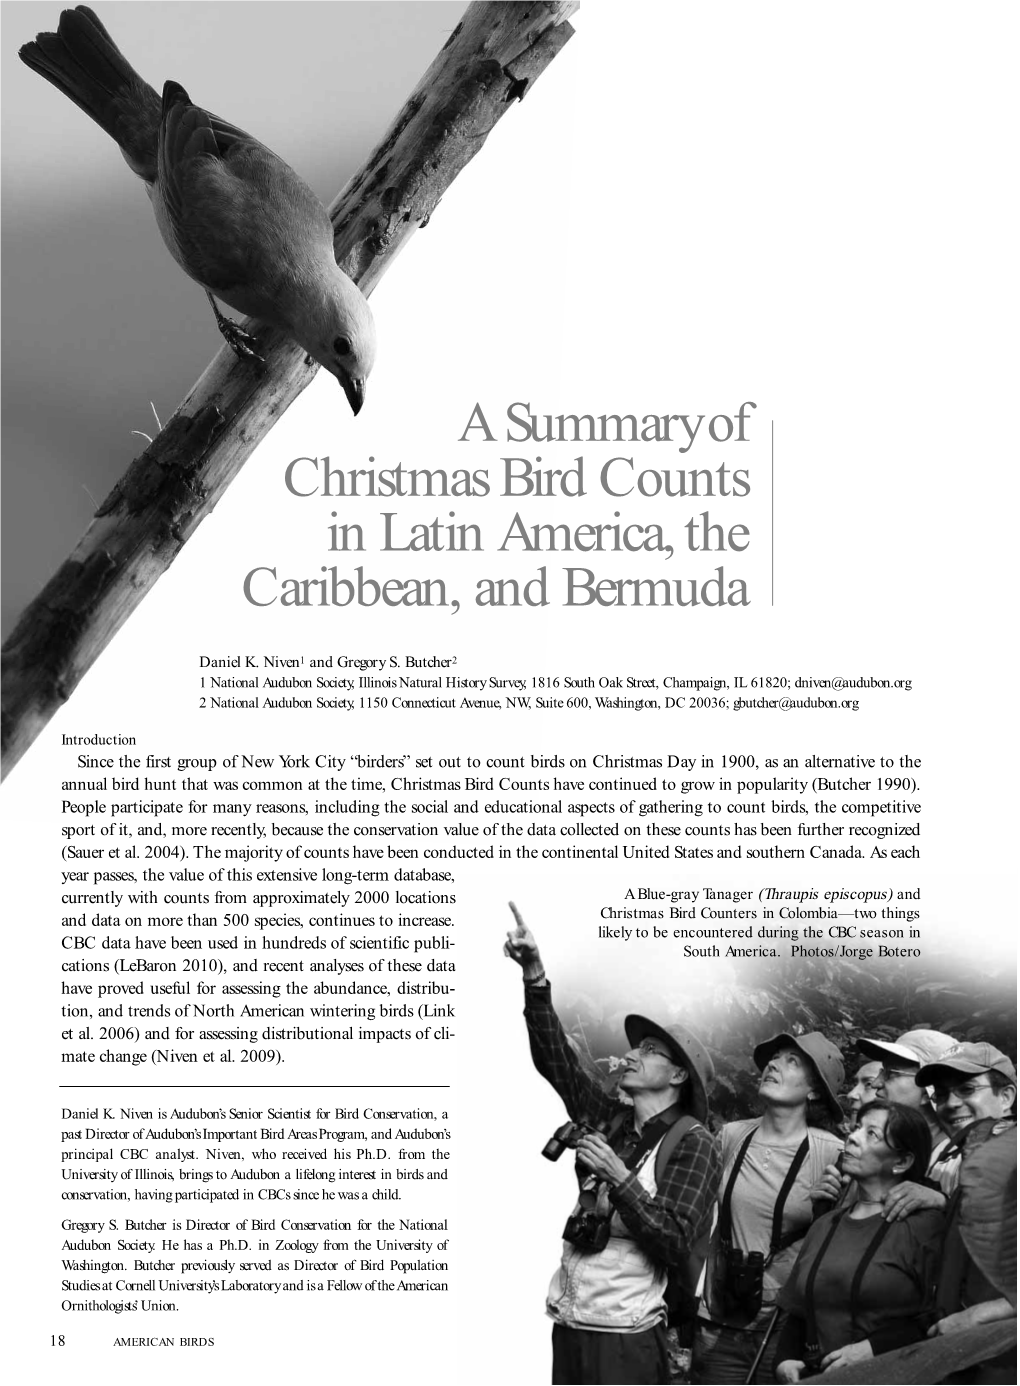 A Summary of Christmas Bird Counts in Latin America, the Caribbean, and Bermuda Continued from Page 23